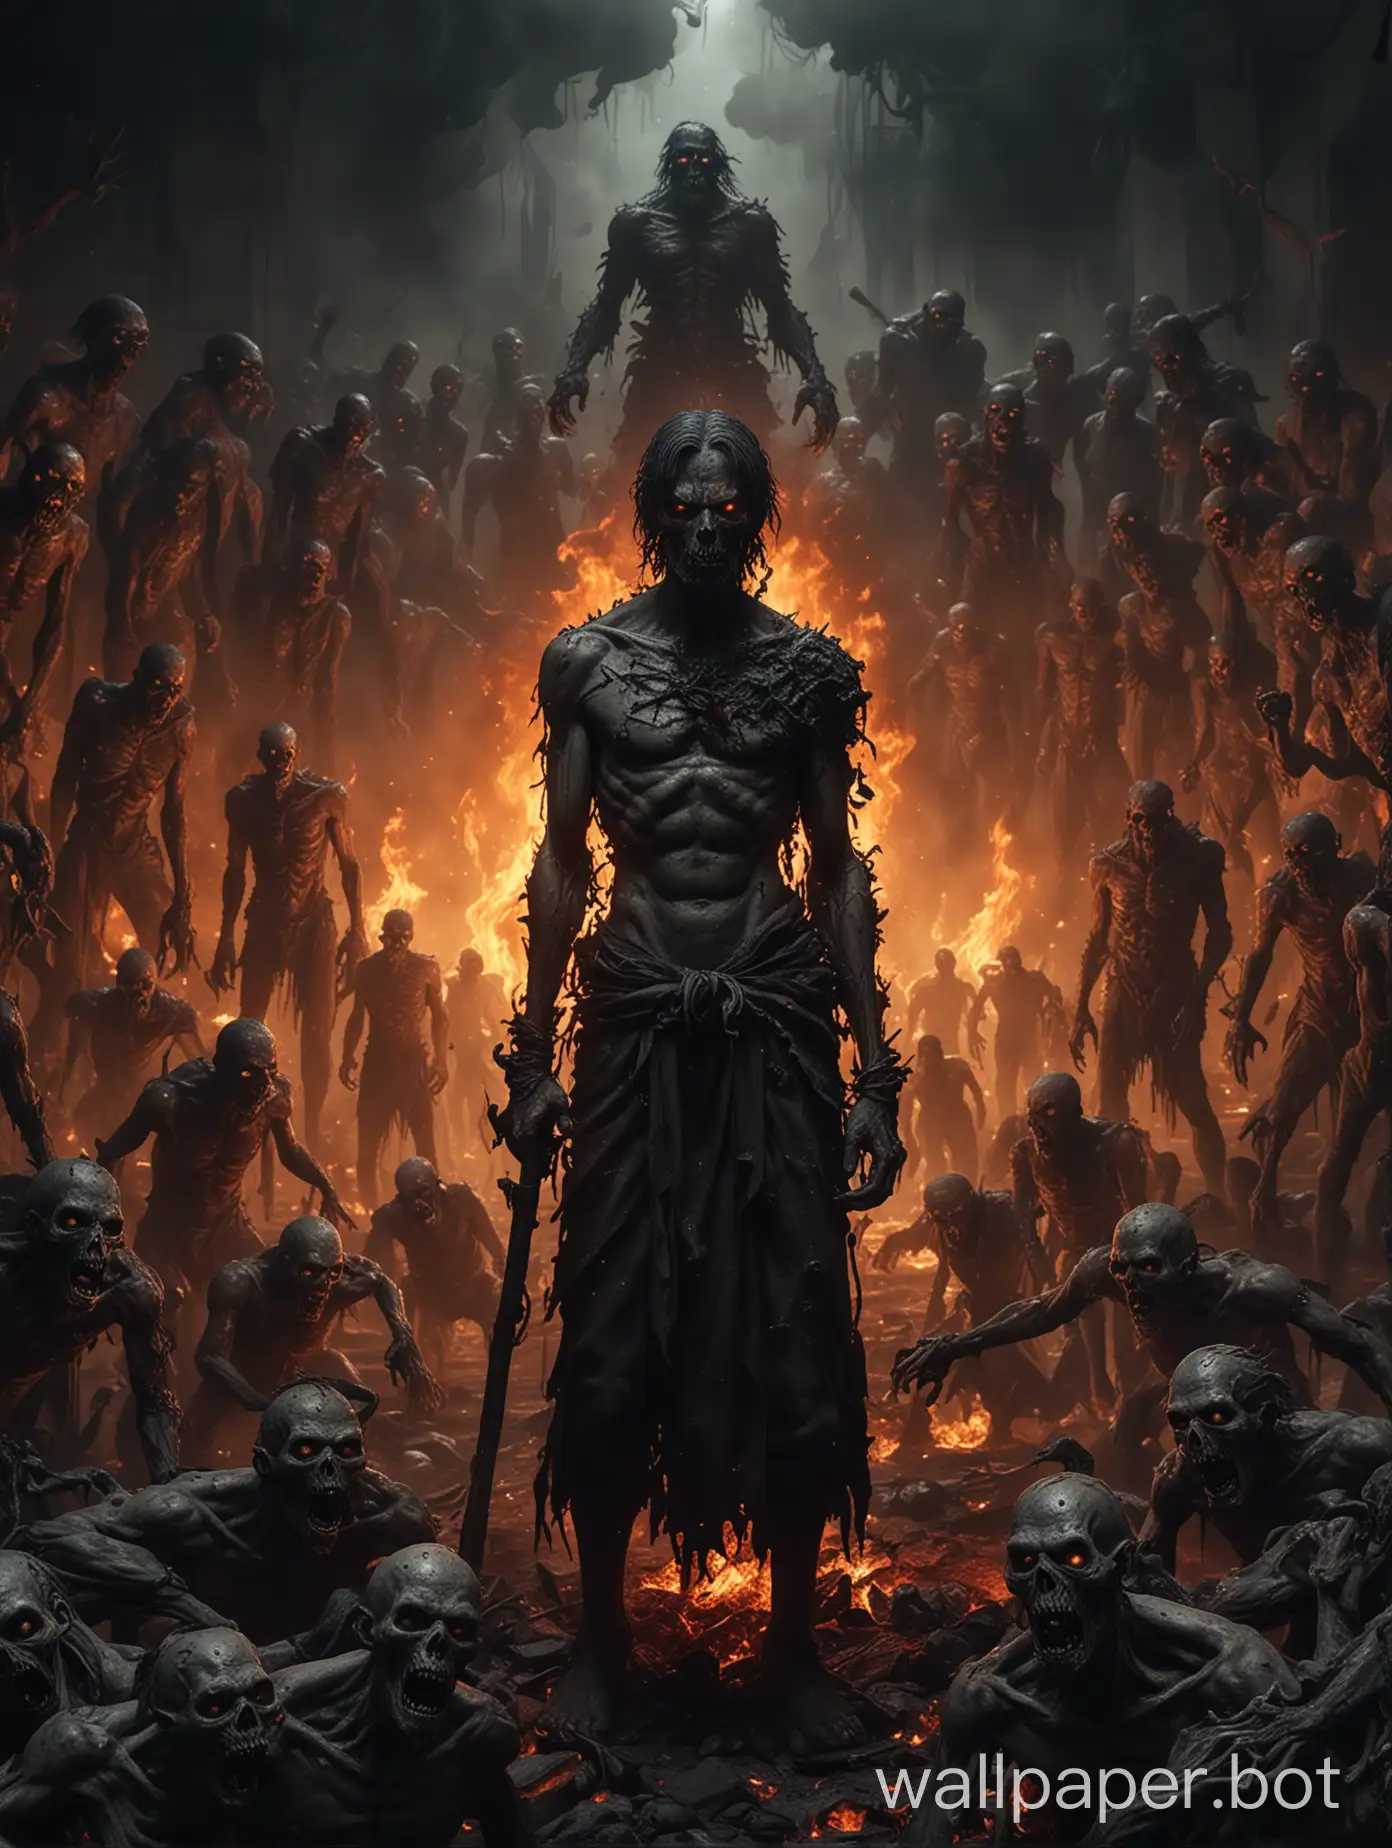 a close up of a person standing in a fire with a bunch of zombies, hell scape, dark fantasy horror art, infernal art in good quality, in hell, standing in hell, ominous figure in the background, dark concept art, this is hell, hyperrealistic hell, horror concept art, satan in hell, king of hell, the god hades